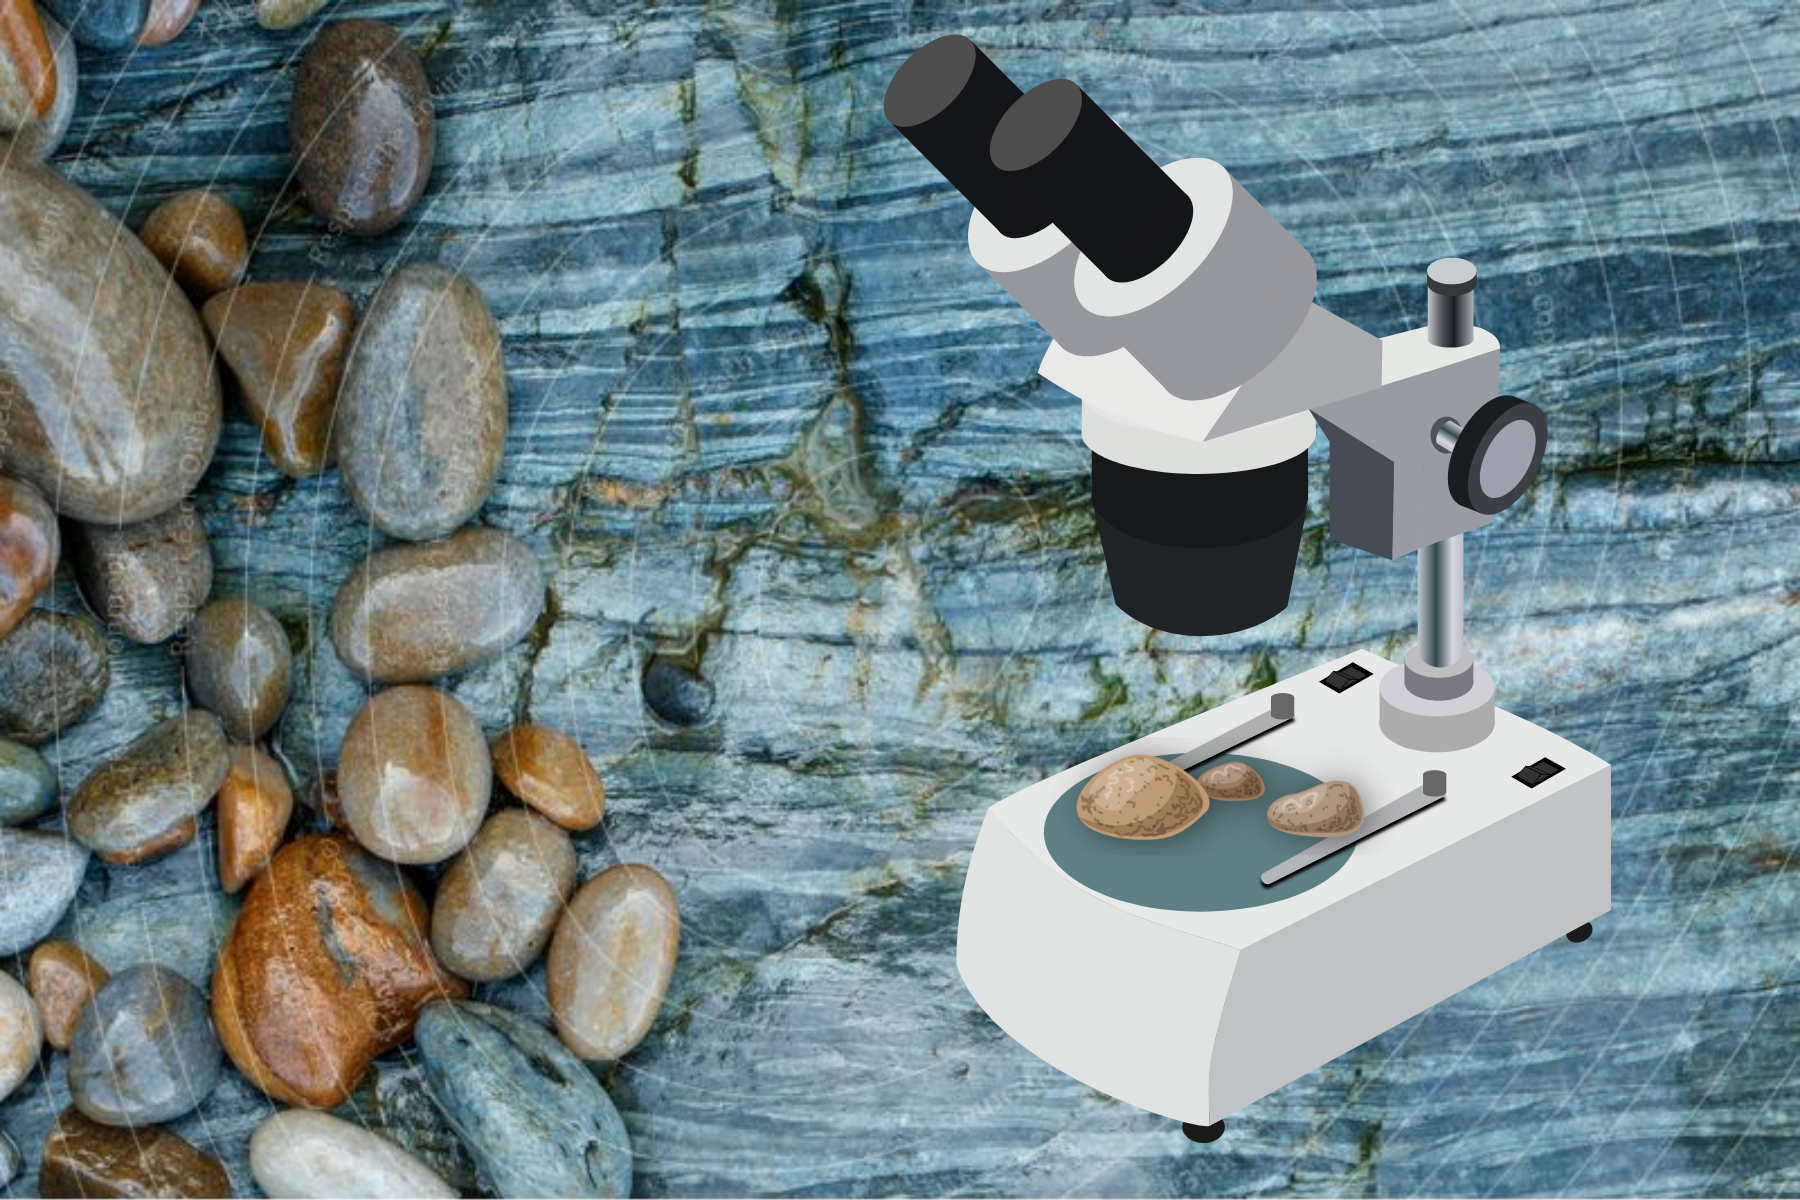 A 3D microscope with three teeny stones and a collection of teeny stone fragments